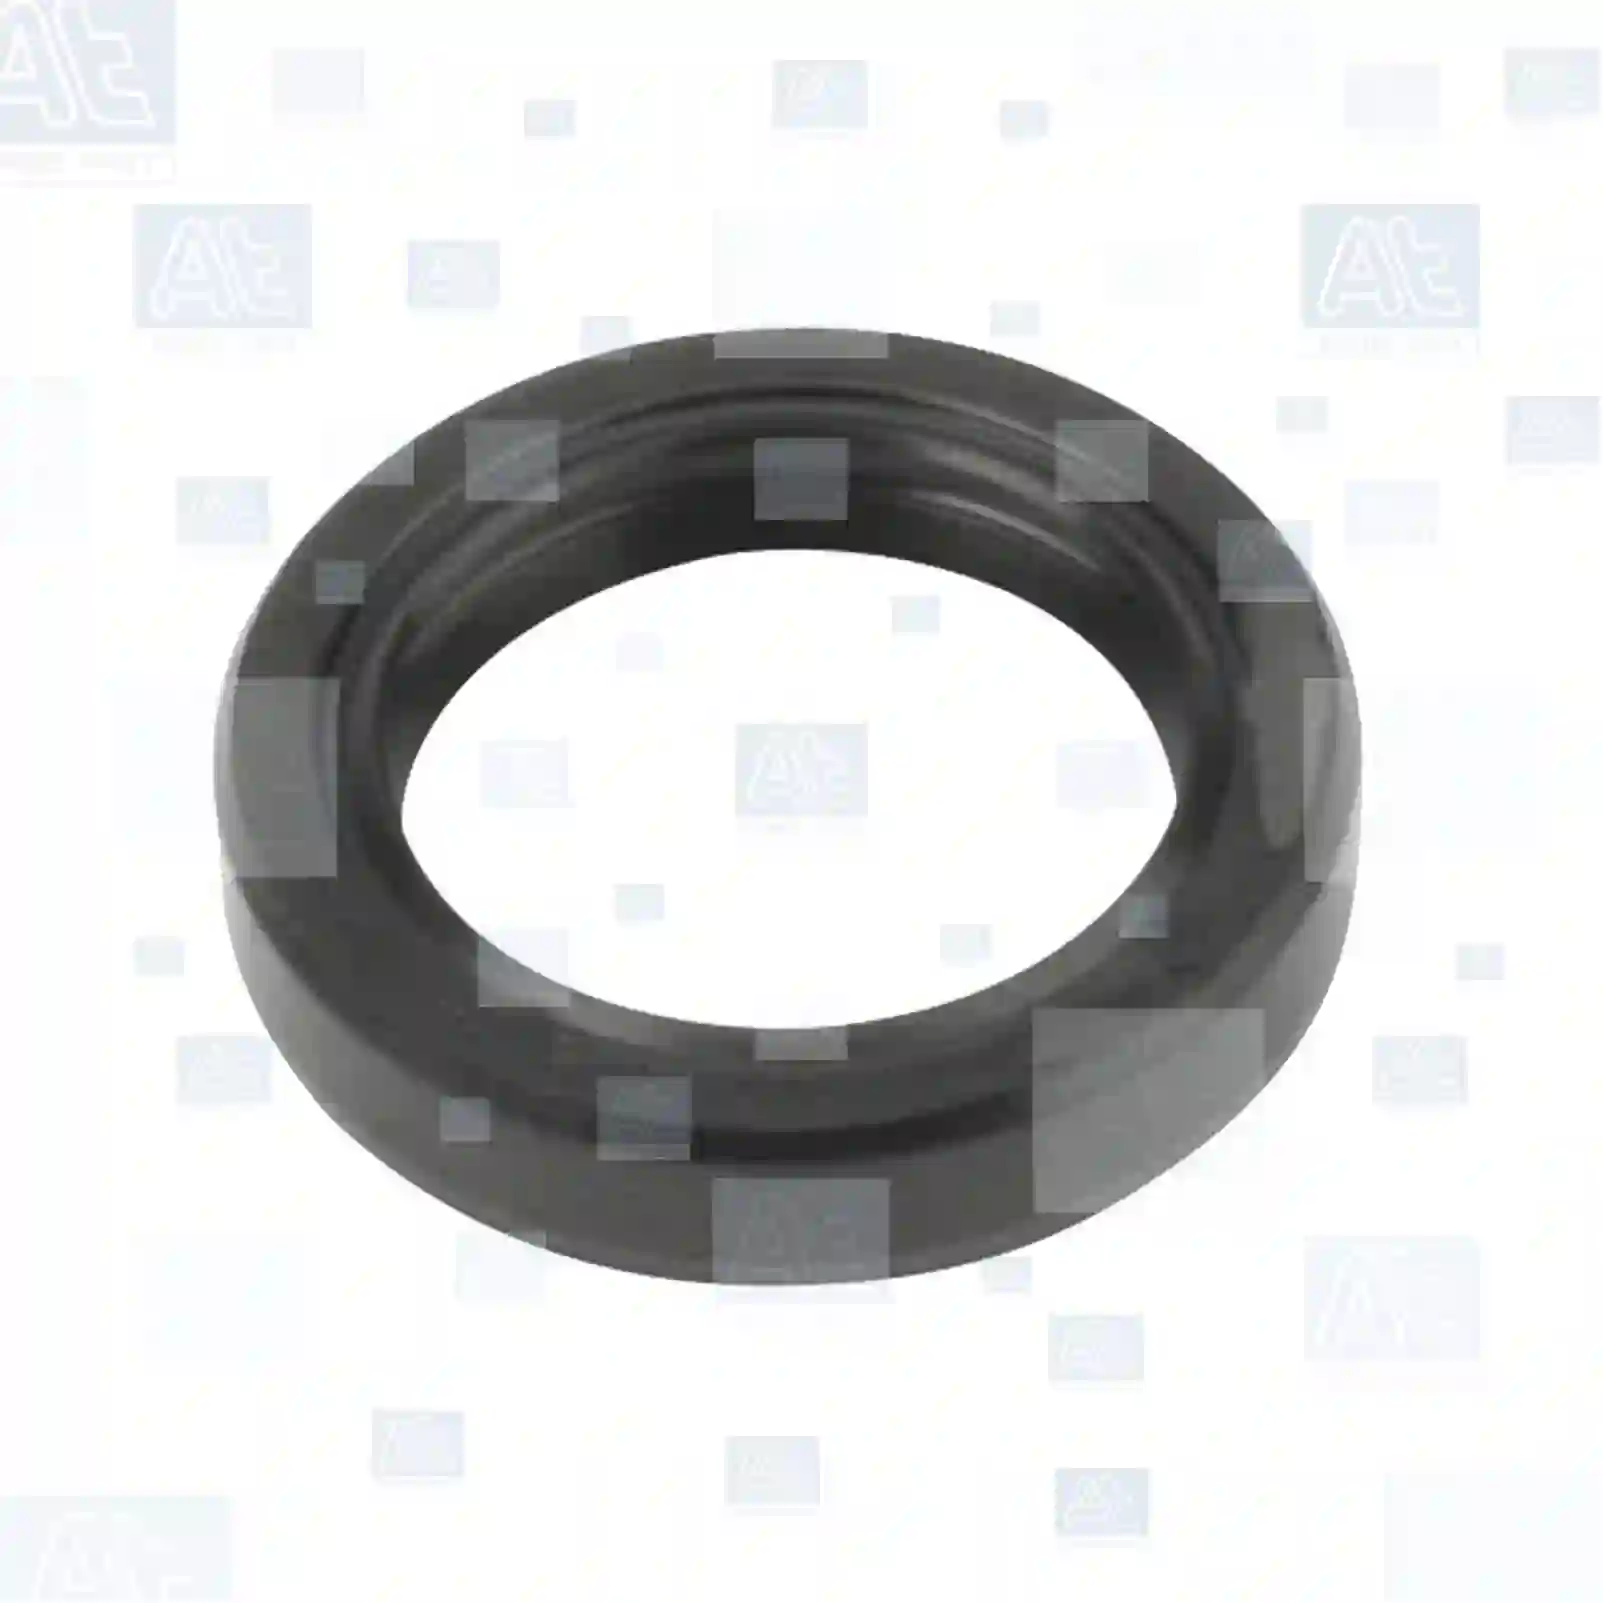 Oil seal, at no 77723357, oem no: 00012562623, 11140002198, 11141256562, 25210102704, 025109, 1456258, 1604095, 1677419, 242040, 01117850, 01125141, 01160738, 02914195, 12037952, X550041202000, 00768343, 00974035, 40001150, 40001720, 40002590, 0049976347, N600000578745, 00768343, 01125141, 01160738, 01299723, 02914195, 02961557, 02985040, 09007175, 2961557, 40101080, 42538283, 768343, RE45889, 01117850, 01125141, 01160738, 02914195, 12037952, 1441802X1, 06562611609, 06562690606, 81965010521, 81965010702, 0029972747, 0049976347, 0069974346, 0099979746, 0109976947, 0119974746, MD701735, 90402535, 12154595, 606901280264, 926681, S8717, 0003001115, 0024472325, 0024472583, 5000240259, 5000242264, 5000242878, 5000283659, 5000286593, 5000560793, 5000824272, 5001860153, 5001861999, 7077225, 215100100, 215200100, 192600, 254635, 329638, 4751140320, 61460080748, 880221534, 880221543, 99012221217, 0001409000, 0003829600, 20525916, 240022, 864299 At Spare Part | Engine, Accelerator Pedal, Camshaft, Connecting Rod, Crankcase, Crankshaft, Cylinder Head, Engine Suspension Mountings, Exhaust Manifold, Exhaust Gas Recirculation, Filter Kits, Flywheel Housing, General Overhaul Kits, Engine, Intake Manifold, Oil Cleaner, Oil Cooler, Oil Filter, Oil Pump, Oil Sump, Piston & Liner, Sensor & Switch, Timing Case, Turbocharger, Cooling System, Belt Tensioner, Coolant Filter, Coolant Pipe, Corrosion Prevention Agent, Drive, Expansion Tank, Fan, Intercooler, Monitors & Gauges, Radiator, Thermostat, V-Belt / Timing belt, Water Pump, Fuel System, Electronical Injector Unit, Feed Pump, Fuel Filter, cpl., Fuel Gauge Sender,  Fuel Line, Fuel Pump, Fuel Tank, Injection Line Kit, Injection Pump, Exhaust System, Clutch & Pedal, Gearbox, Propeller Shaft, Axles, Brake System, Hubs & Wheels, Suspension, Leaf Spring, Universal Parts / Accessories, Steering, Electrical System, Cabin Oil seal, at no 77723357, oem no: 00012562623, 11140002198, 11141256562, 25210102704, 025109, 1456258, 1604095, 1677419, 242040, 01117850, 01125141, 01160738, 02914195, 12037952, X550041202000, 00768343, 00974035, 40001150, 40001720, 40002590, 0049976347, N600000578745, 00768343, 01125141, 01160738, 01299723, 02914195, 02961557, 02985040, 09007175, 2961557, 40101080, 42538283, 768343, RE45889, 01117850, 01125141, 01160738, 02914195, 12037952, 1441802X1, 06562611609, 06562690606, 81965010521, 81965010702, 0029972747, 0049976347, 0069974346, 0099979746, 0109976947, 0119974746, MD701735, 90402535, 12154595, 606901280264, 926681, S8717, 0003001115, 0024472325, 0024472583, 5000240259, 5000242264, 5000242878, 5000283659, 5000286593, 5000560793, 5000824272, 5001860153, 5001861999, 7077225, 215100100, 215200100, 192600, 254635, 329638, 4751140320, 61460080748, 880221534, 880221543, 99012221217, 0001409000, 0003829600, 20525916, 240022, 864299 At Spare Part | Engine, Accelerator Pedal, Camshaft, Connecting Rod, Crankcase, Crankshaft, Cylinder Head, Engine Suspension Mountings, Exhaust Manifold, Exhaust Gas Recirculation, Filter Kits, Flywheel Housing, General Overhaul Kits, Engine, Intake Manifold, Oil Cleaner, Oil Cooler, Oil Filter, Oil Pump, Oil Sump, Piston & Liner, Sensor & Switch, Timing Case, Turbocharger, Cooling System, Belt Tensioner, Coolant Filter, Coolant Pipe, Corrosion Prevention Agent, Drive, Expansion Tank, Fan, Intercooler, Monitors & Gauges, Radiator, Thermostat, V-Belt / Timing belt, Water Pump, Fuel System, Electronical Injector Unit, Feed Pump, Fuel Filter, cpl., Fuel Gauge Sender,  Fuel Line, Fuel Pump, Fuel Tank, Injection Line Kit, Injection Pump, Exhaust System, Clutch & Pedal, Gearbox, Propeller Shaft, Axles, Brake System, Hubs & Wheels, Suspension, Leaf Spring, Universal Parts / Accessories, Steering, Electrical System, Cabin